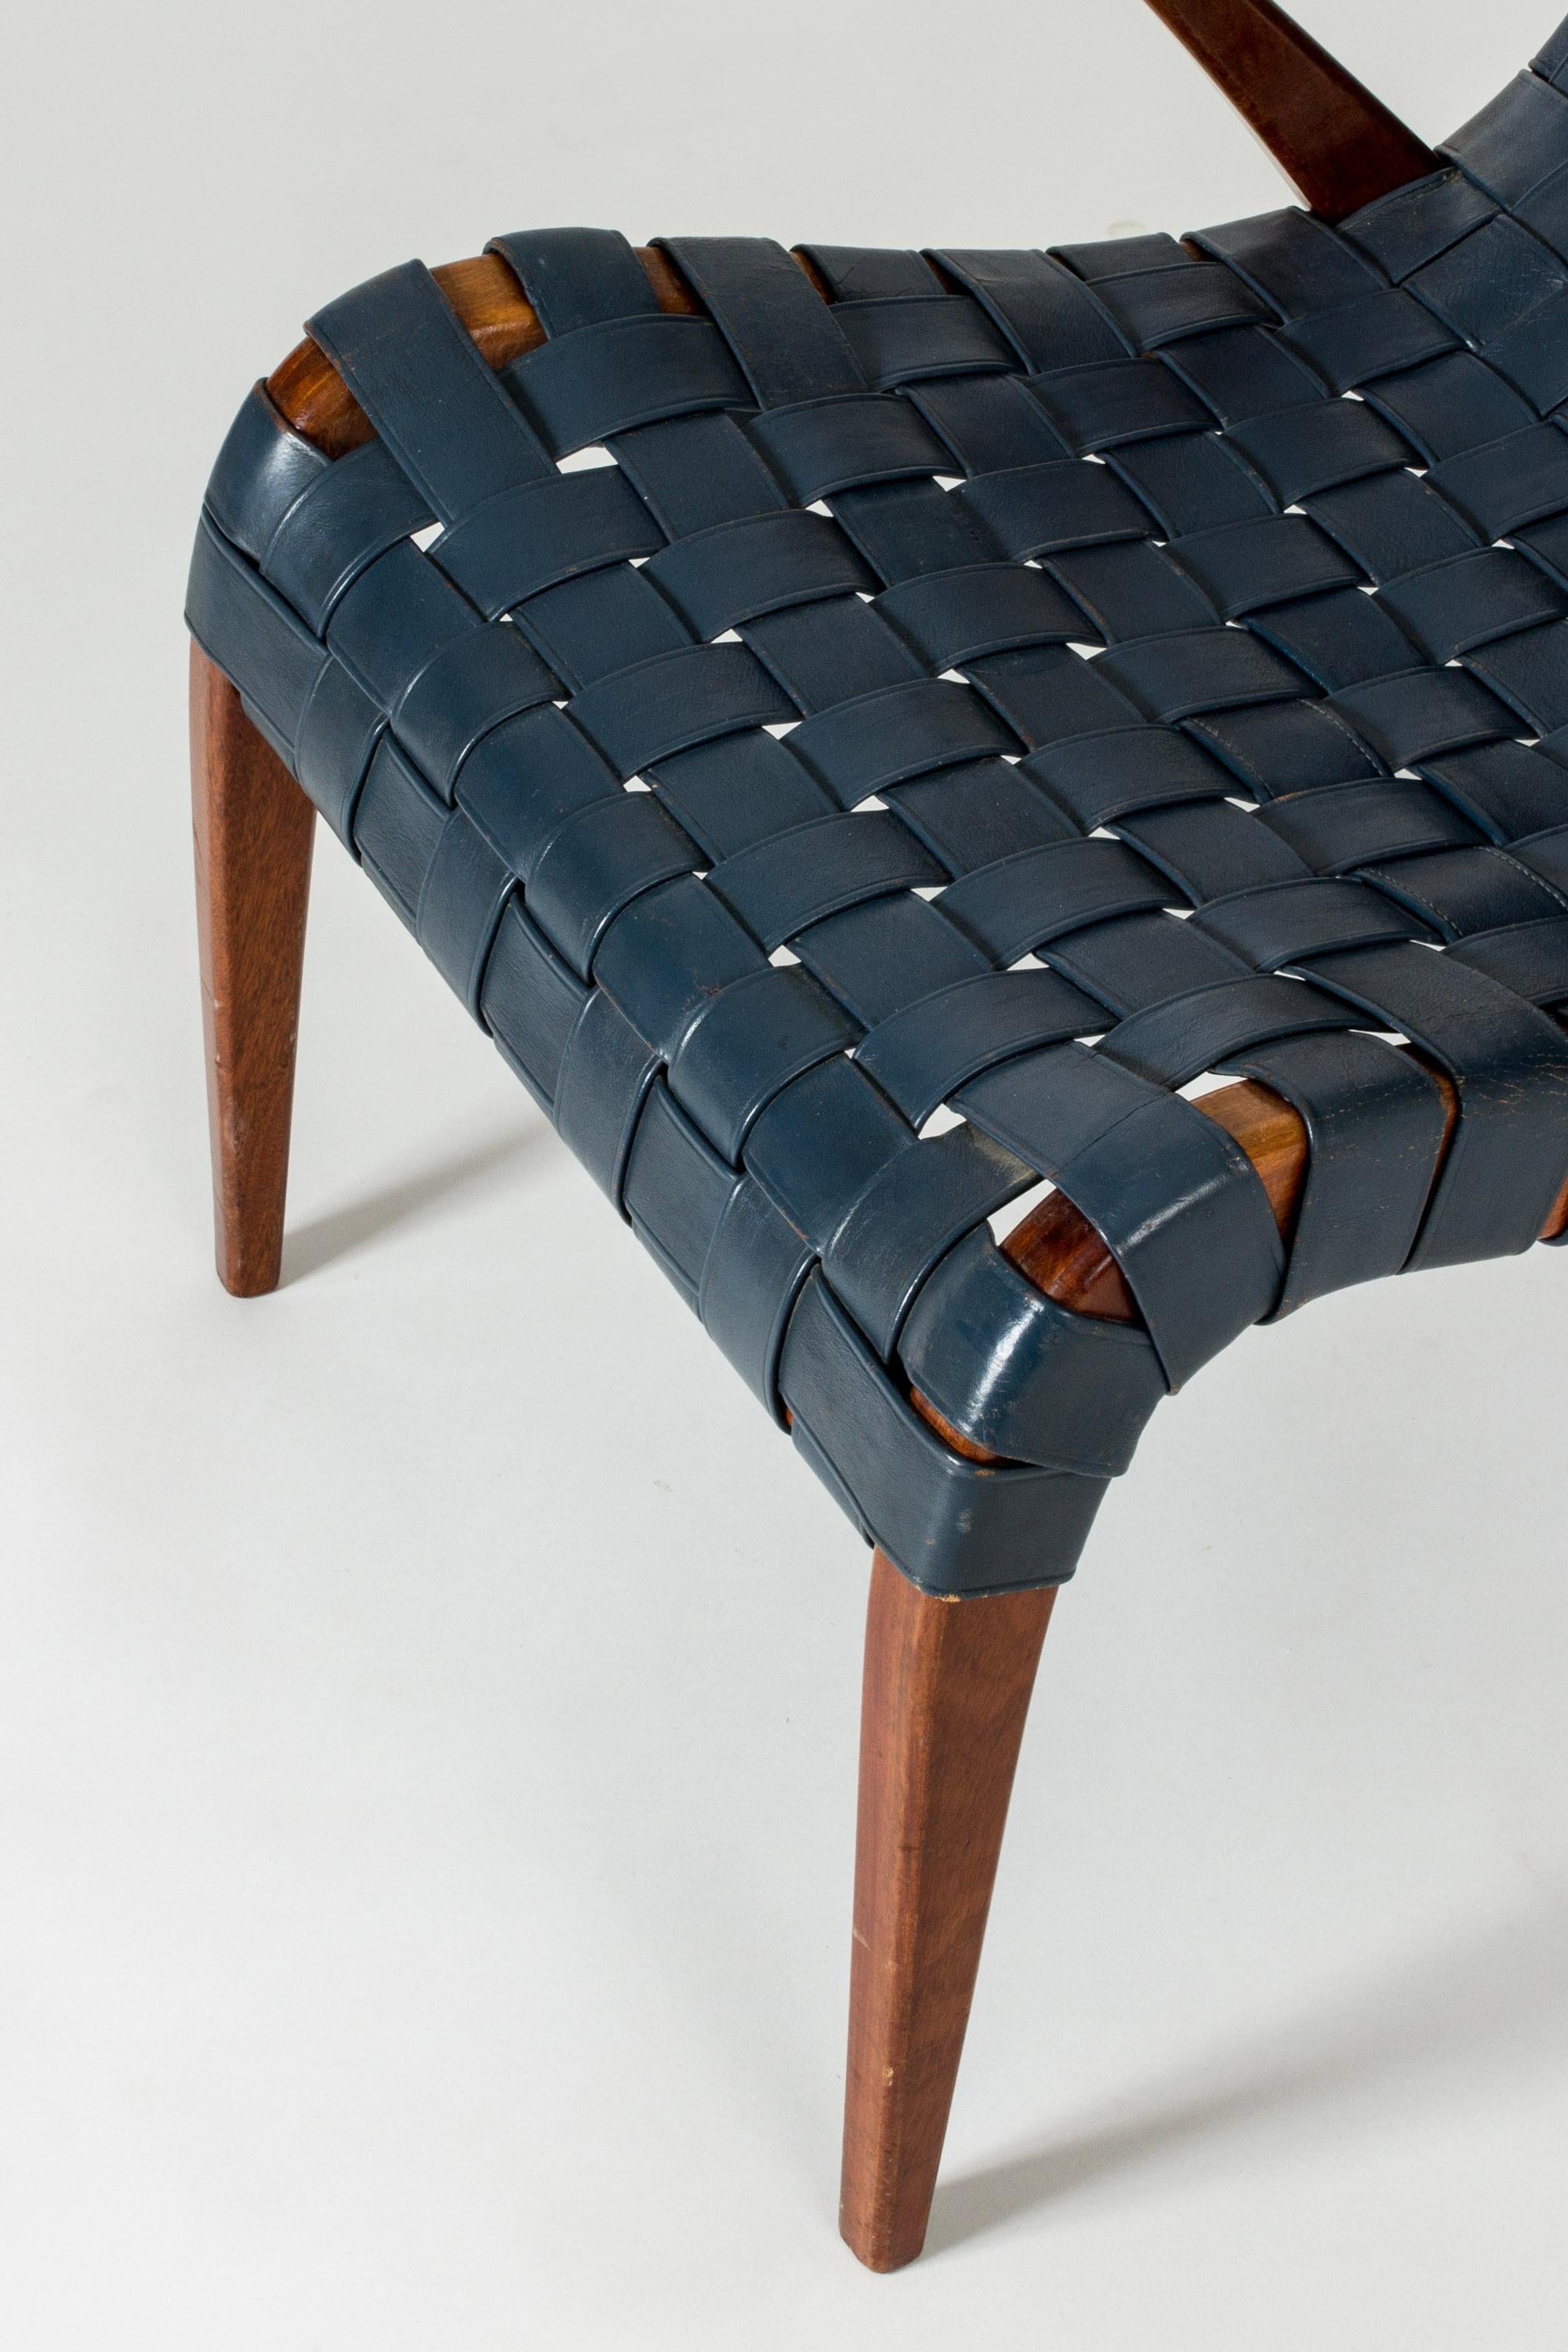 Mid-20th Century Scandinavian Modern Lounge Chair and Footstool by Axel Larsson, Sweden, 1950s For Sale